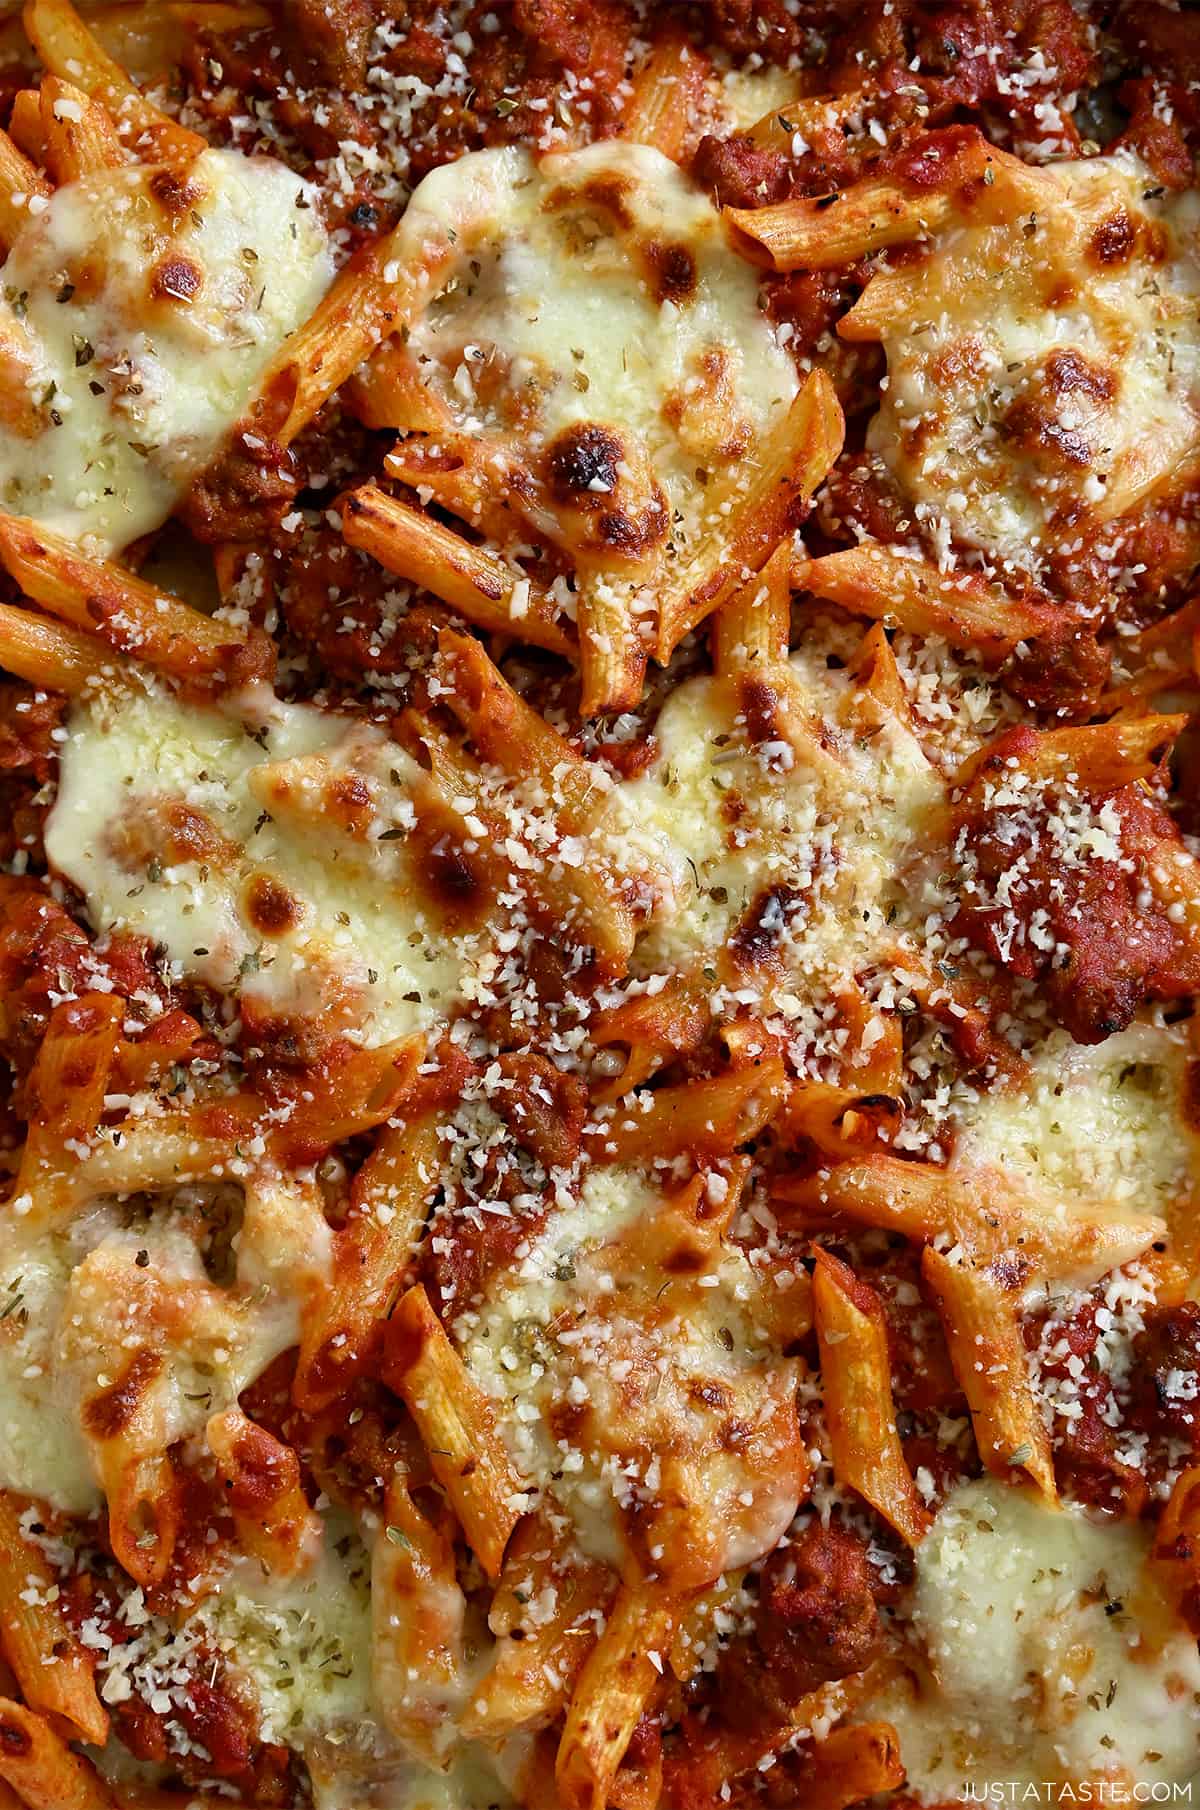 Baked penne pasta with golden brown mozzarella and freshly grated Parmesan cheese.